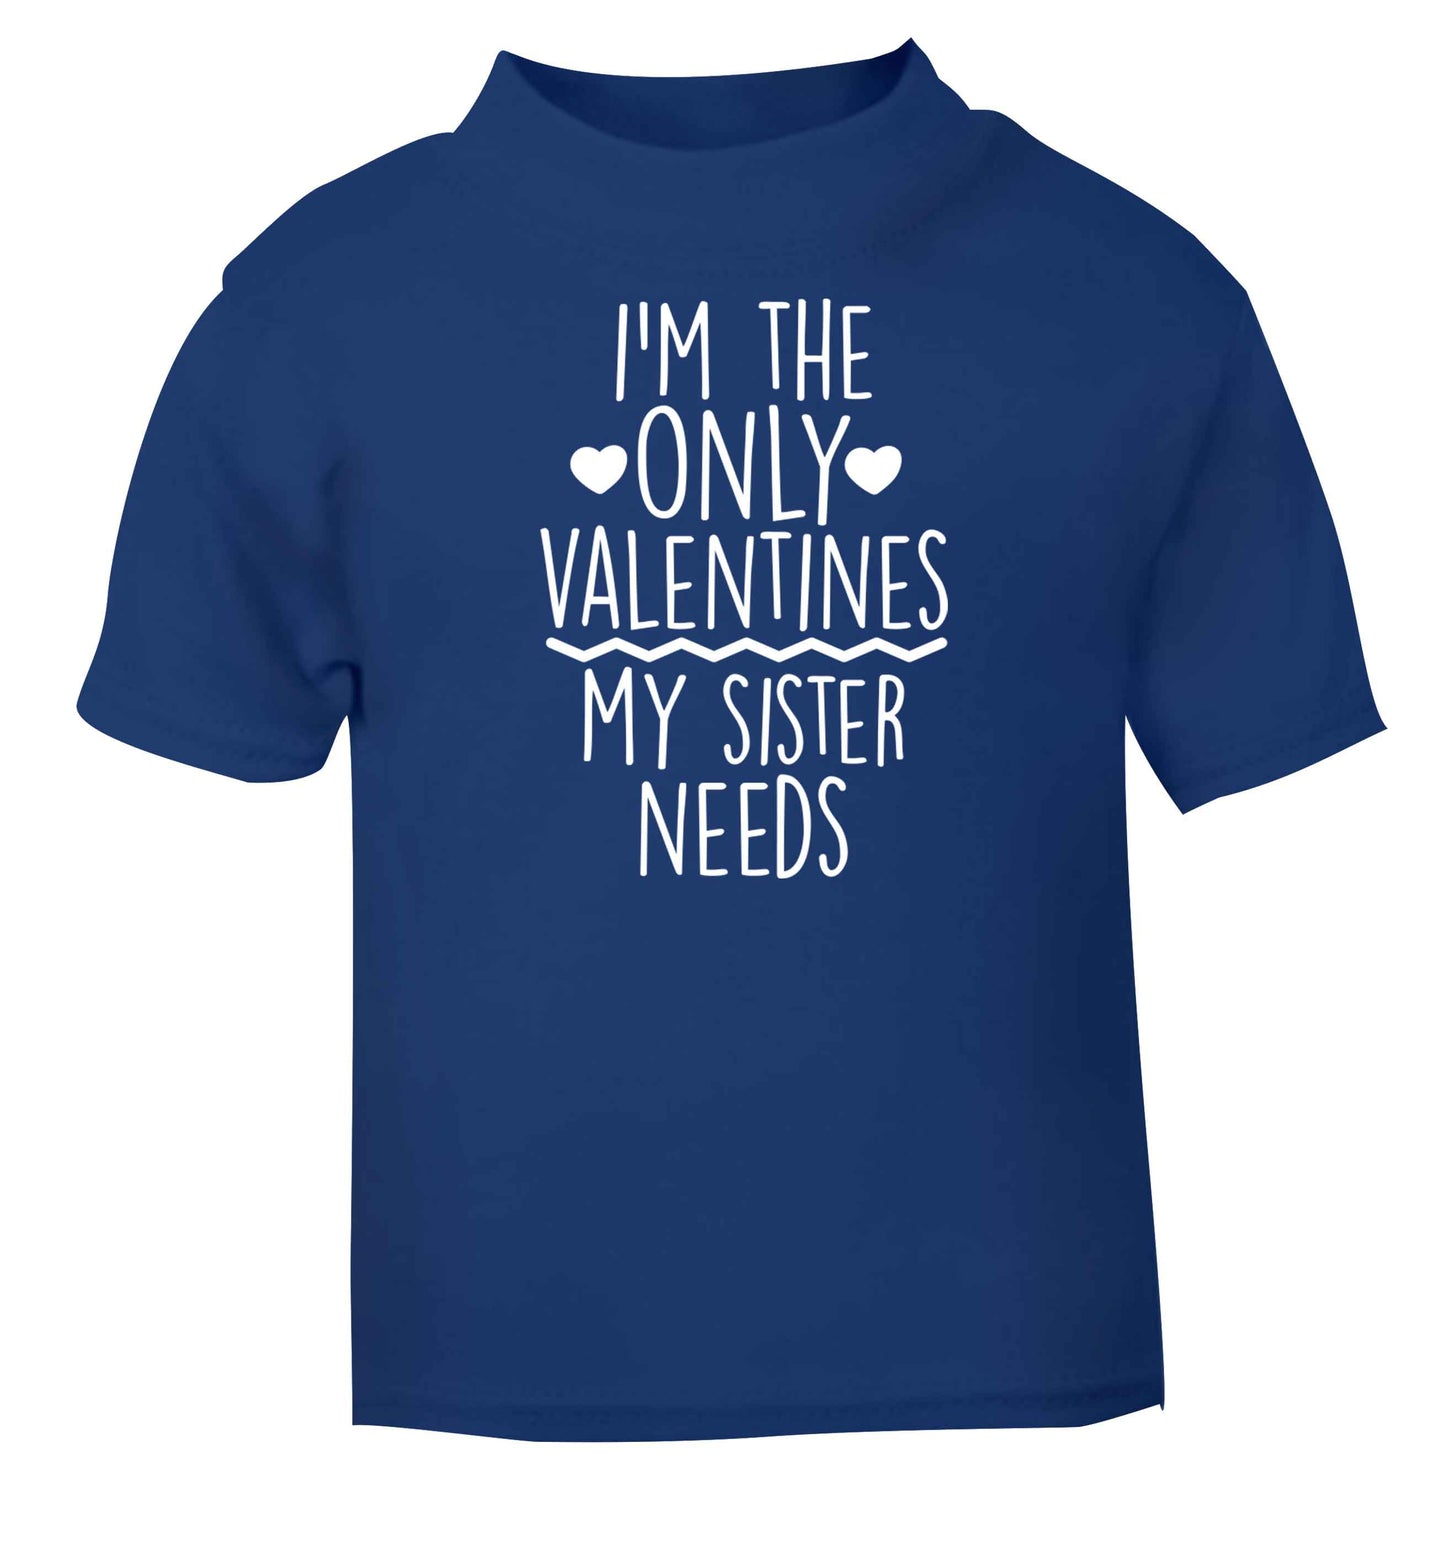 I'm the only valentines my sister needs blue baby toddler Tshirt 2 Years